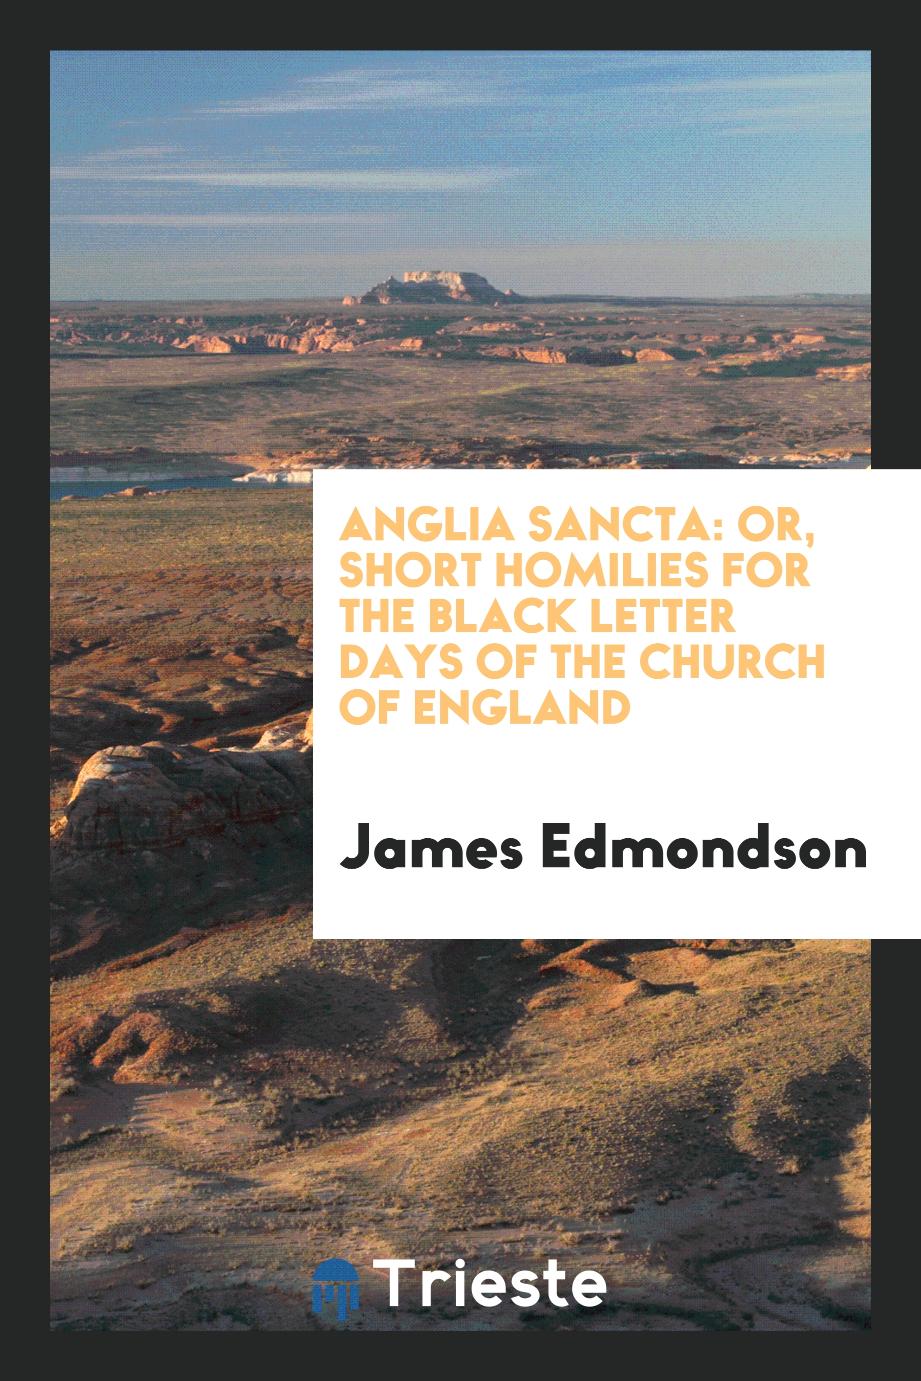 Anglia sancta: or, Short homilies for the black letter days of the Church of England